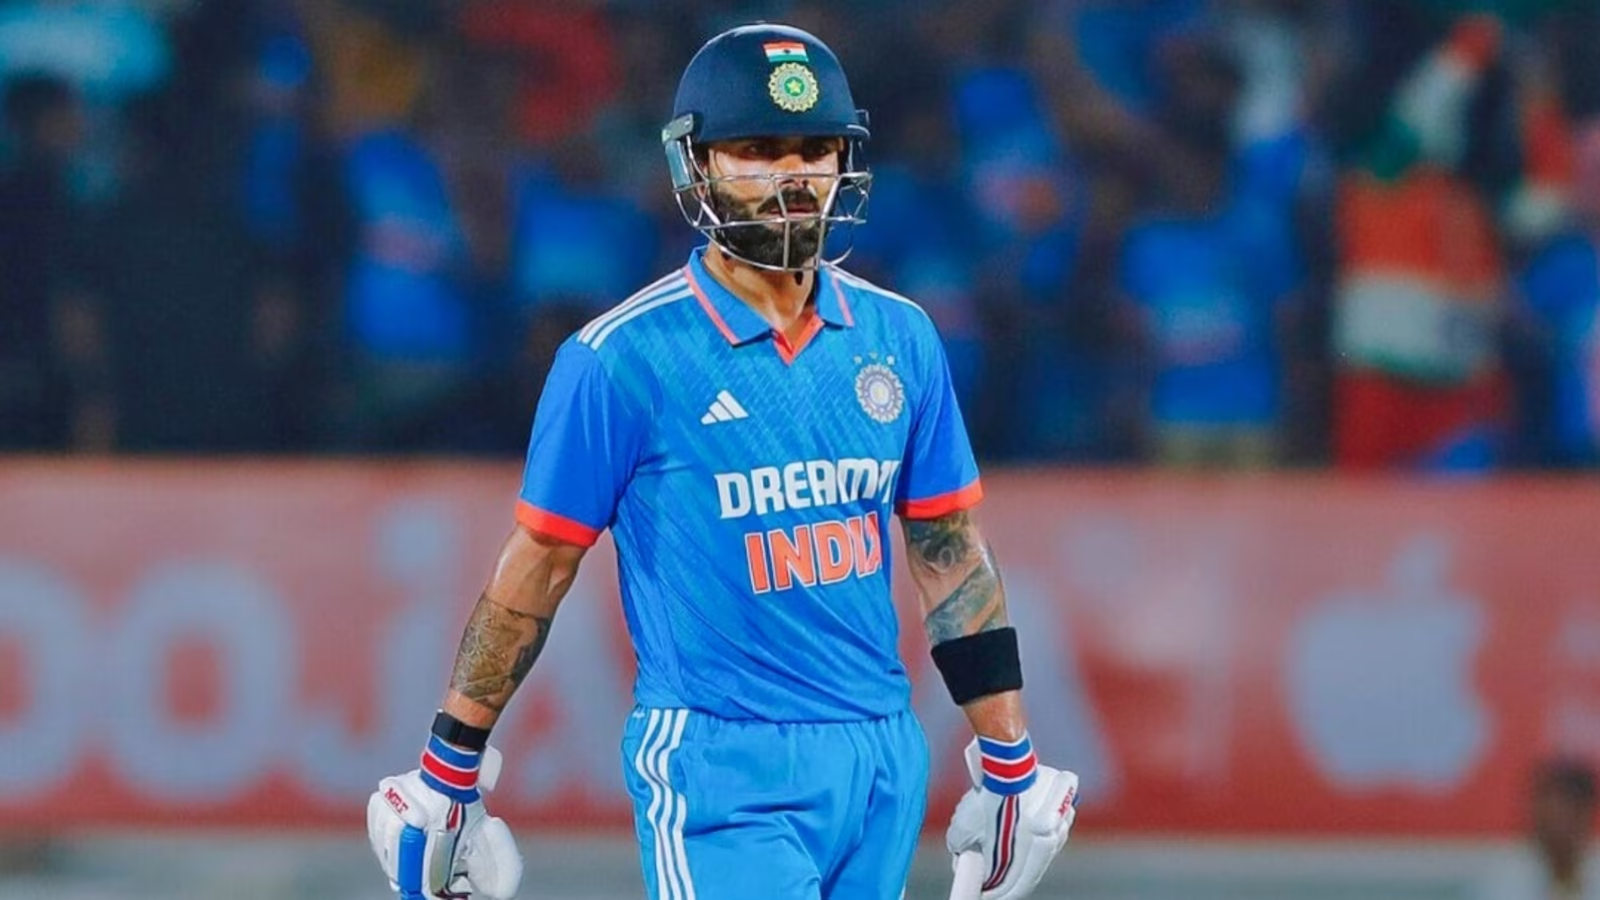 ‘Those Angry Celebrations Are A Thing Of The Past’: Virat Kohli Reflects On Rough Patch Ahead Of 2023 World Cup